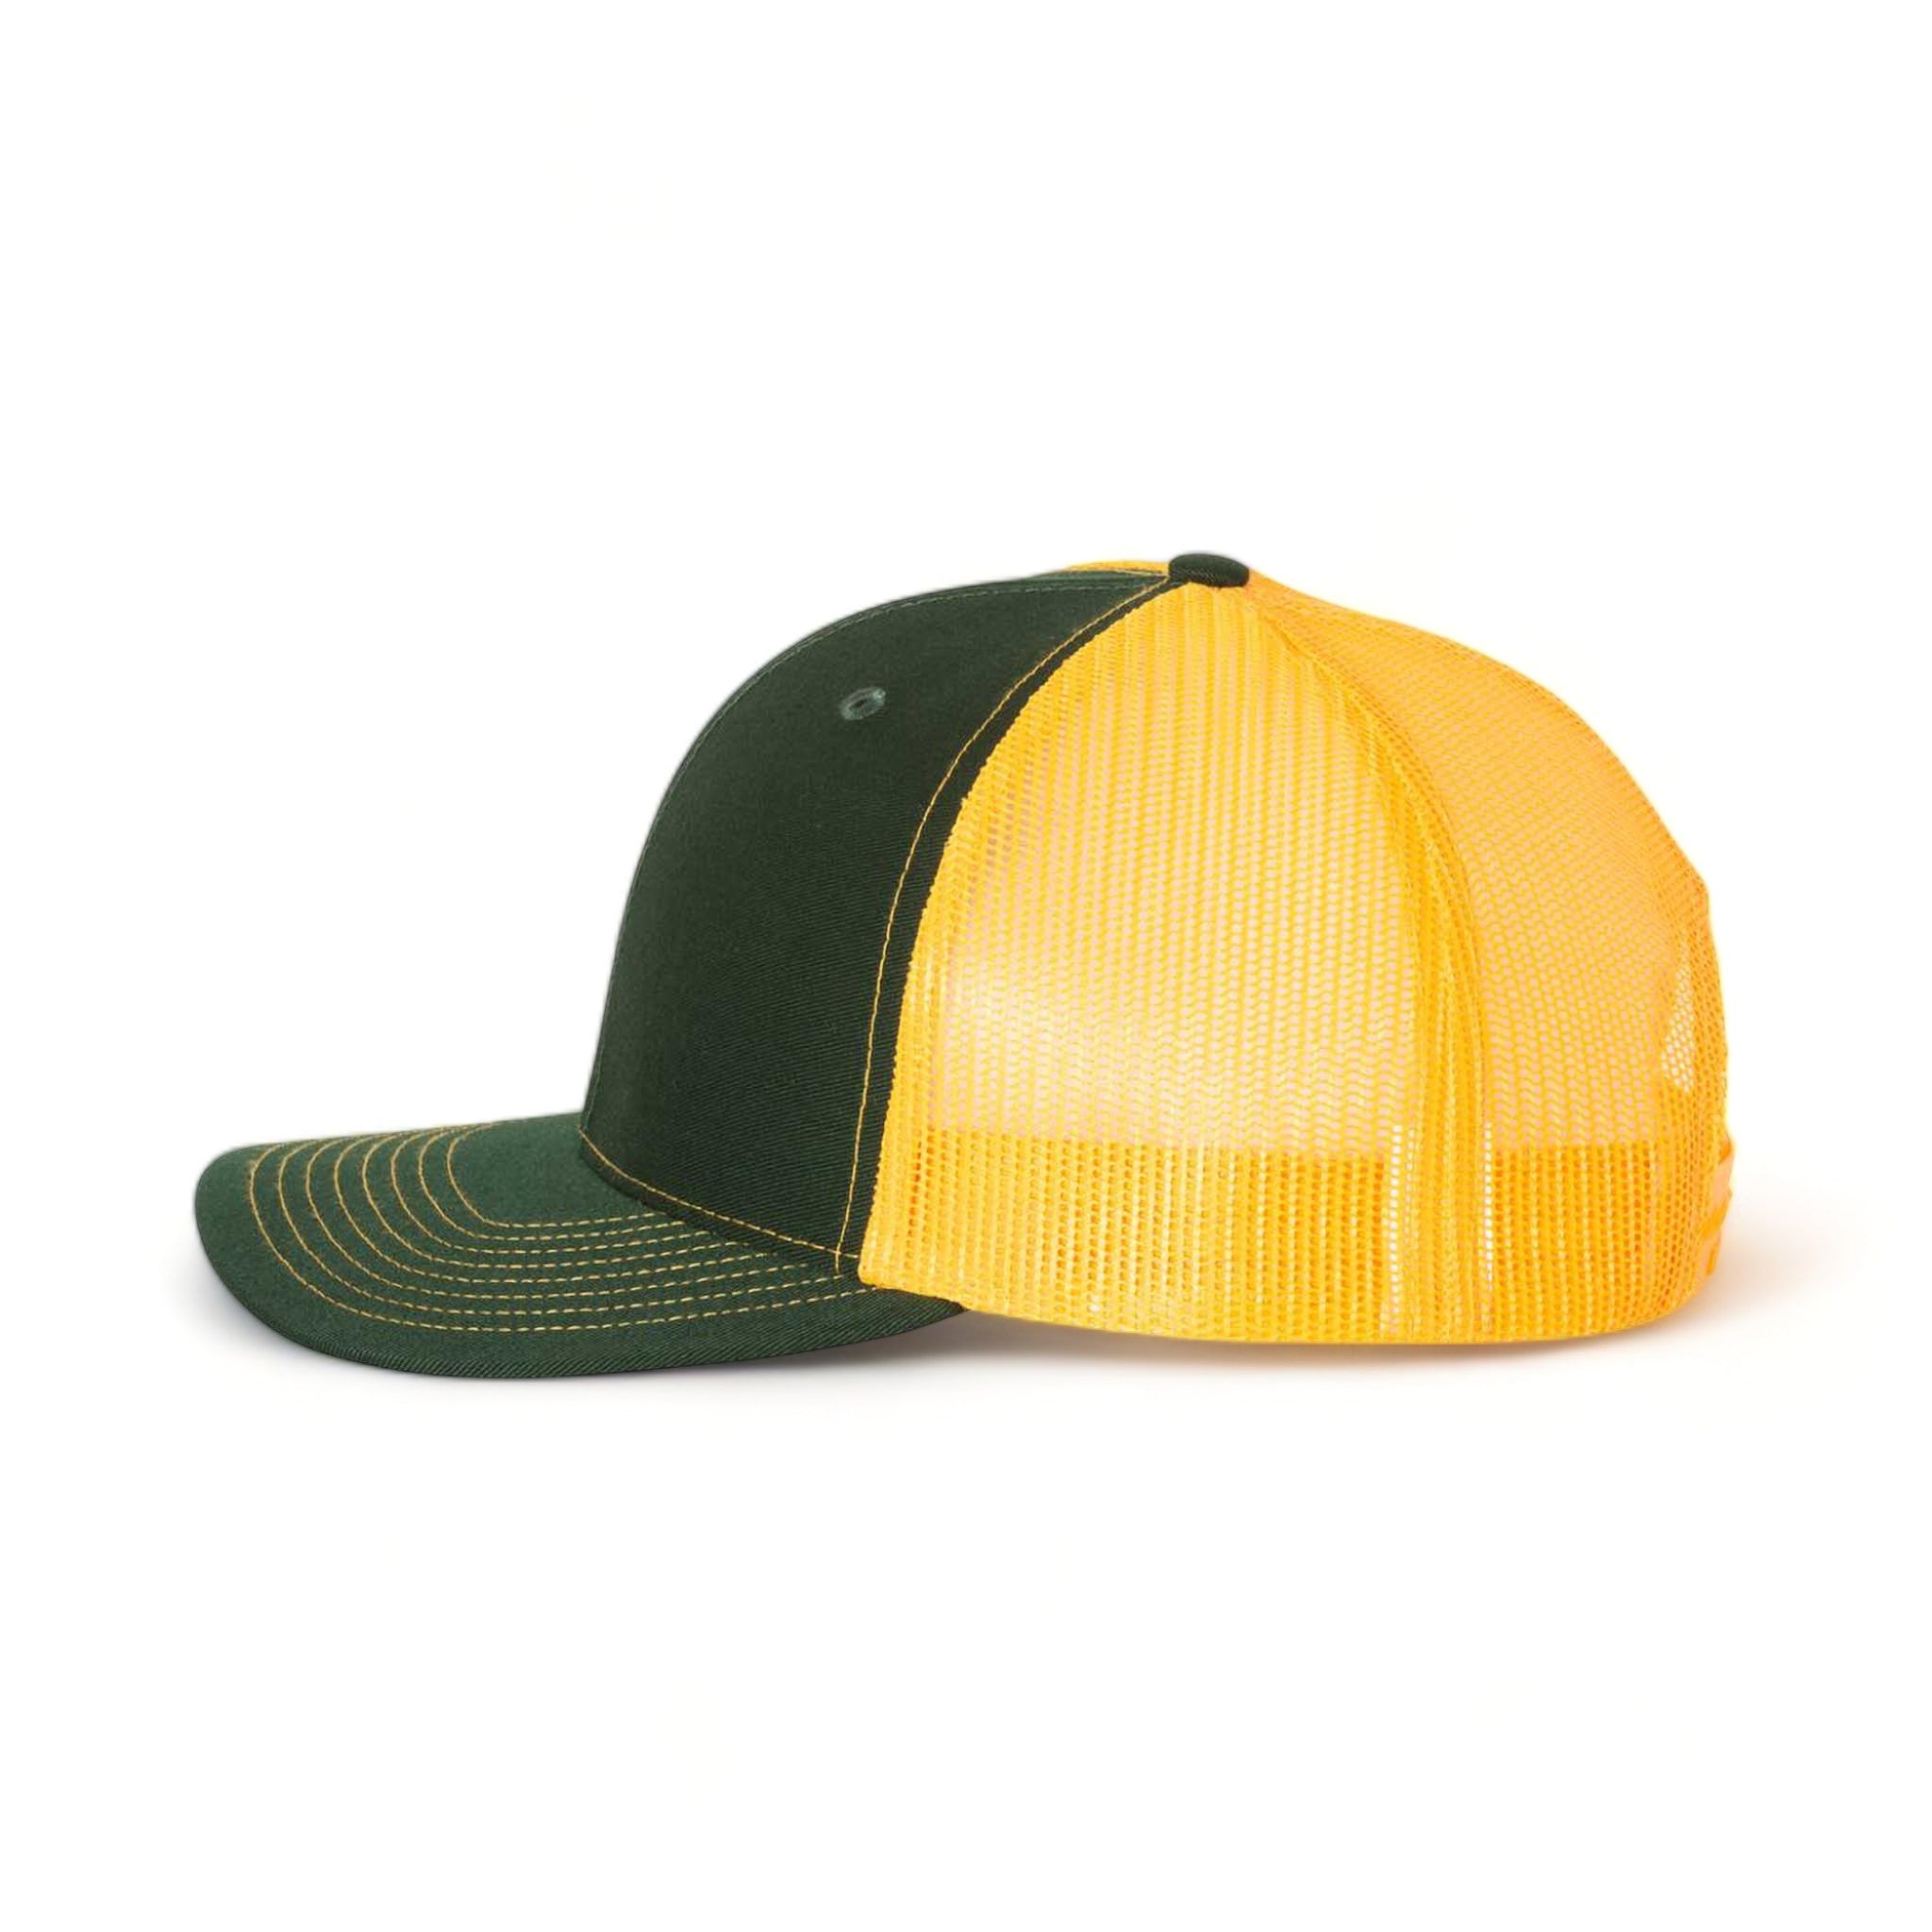 Side view of Richardson 112 custom hat in dark green and gold